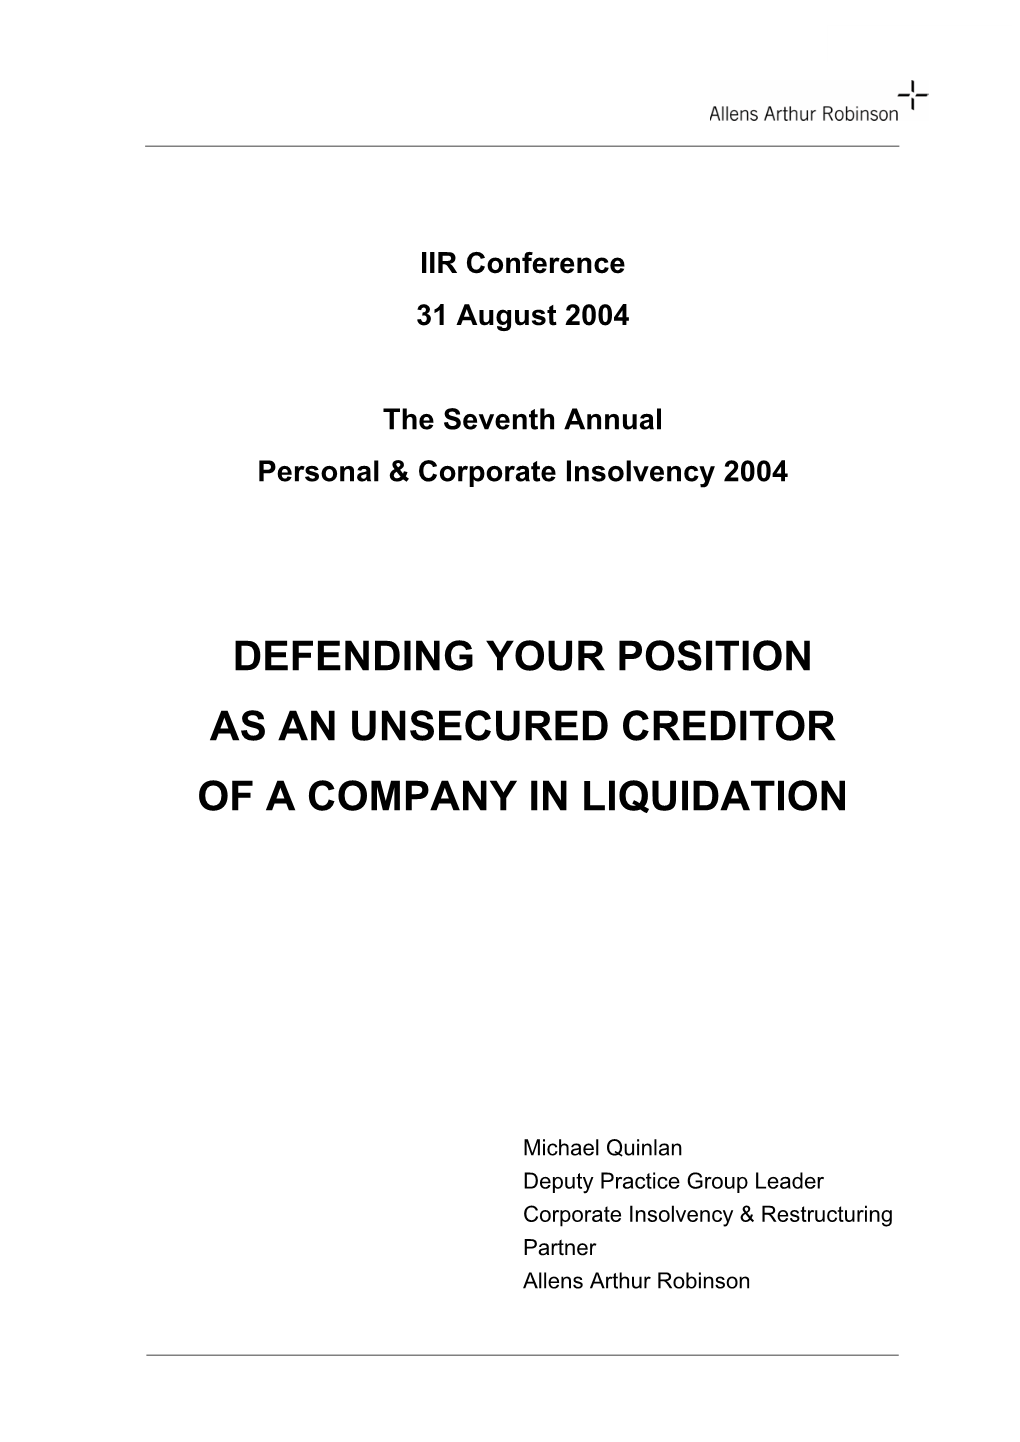 Defending Your Position As an Unsecured Creditor of a Company in Liquidation